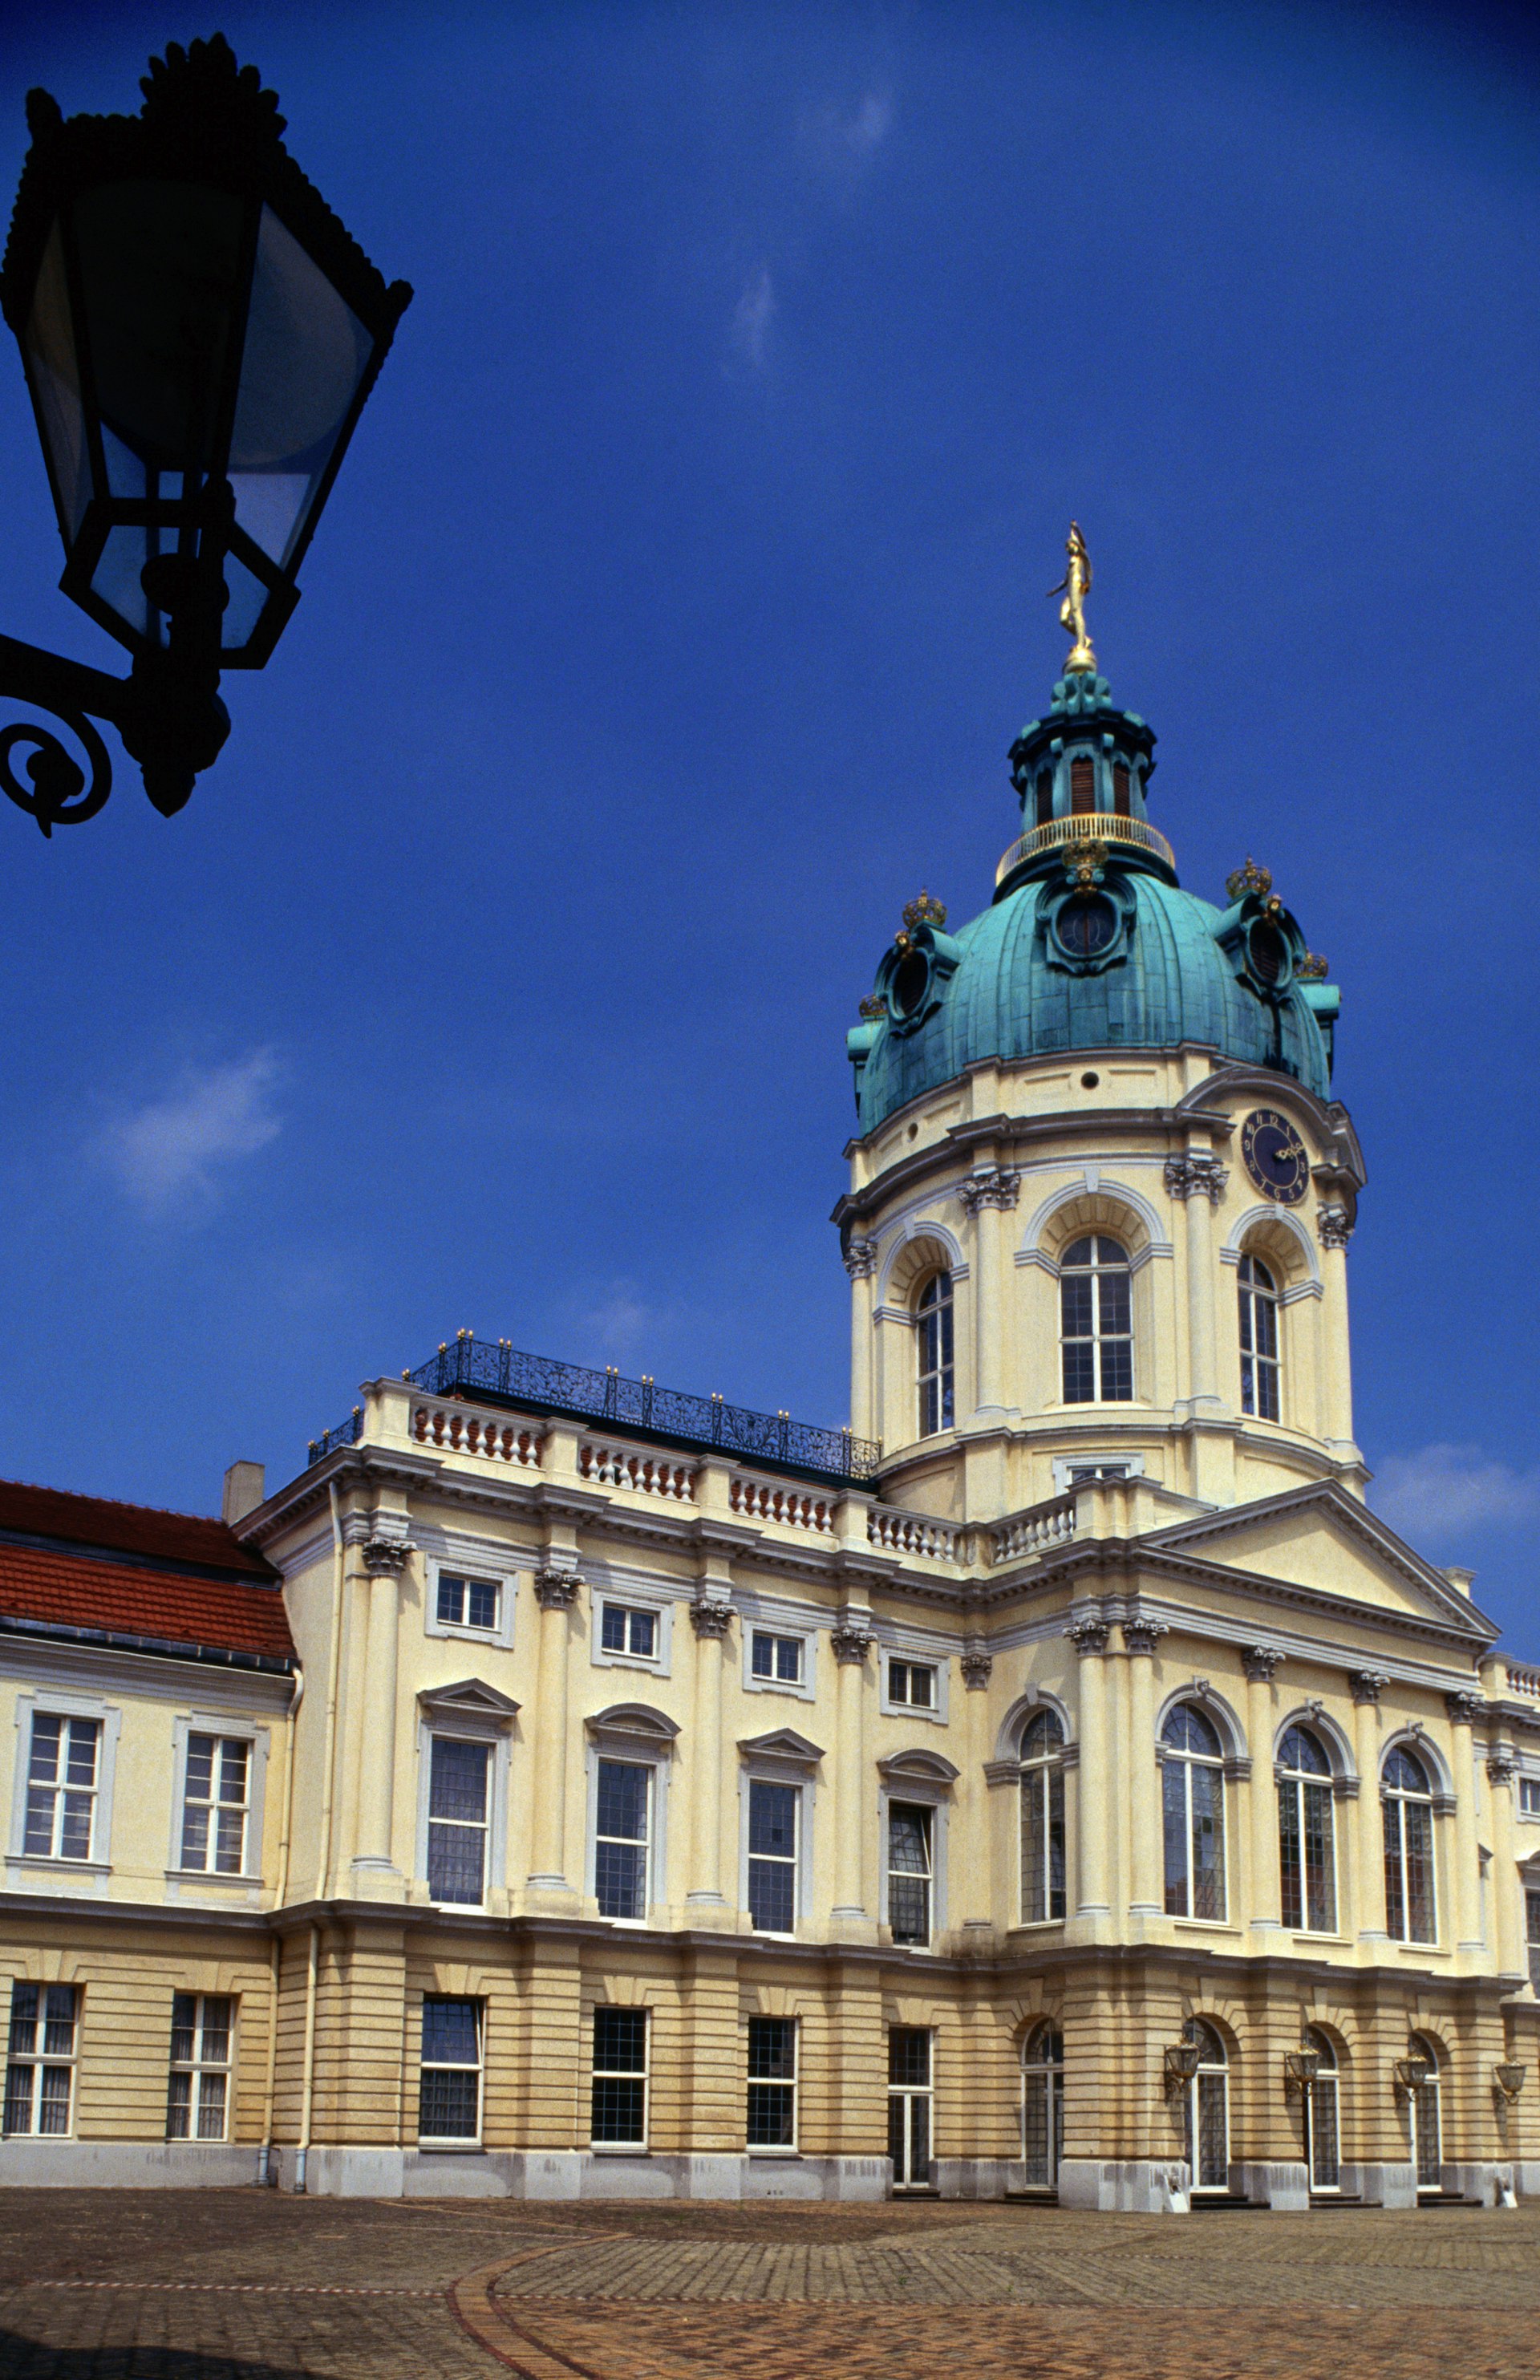 An external view of Schloss Charlottenburg with clear blue skies above it